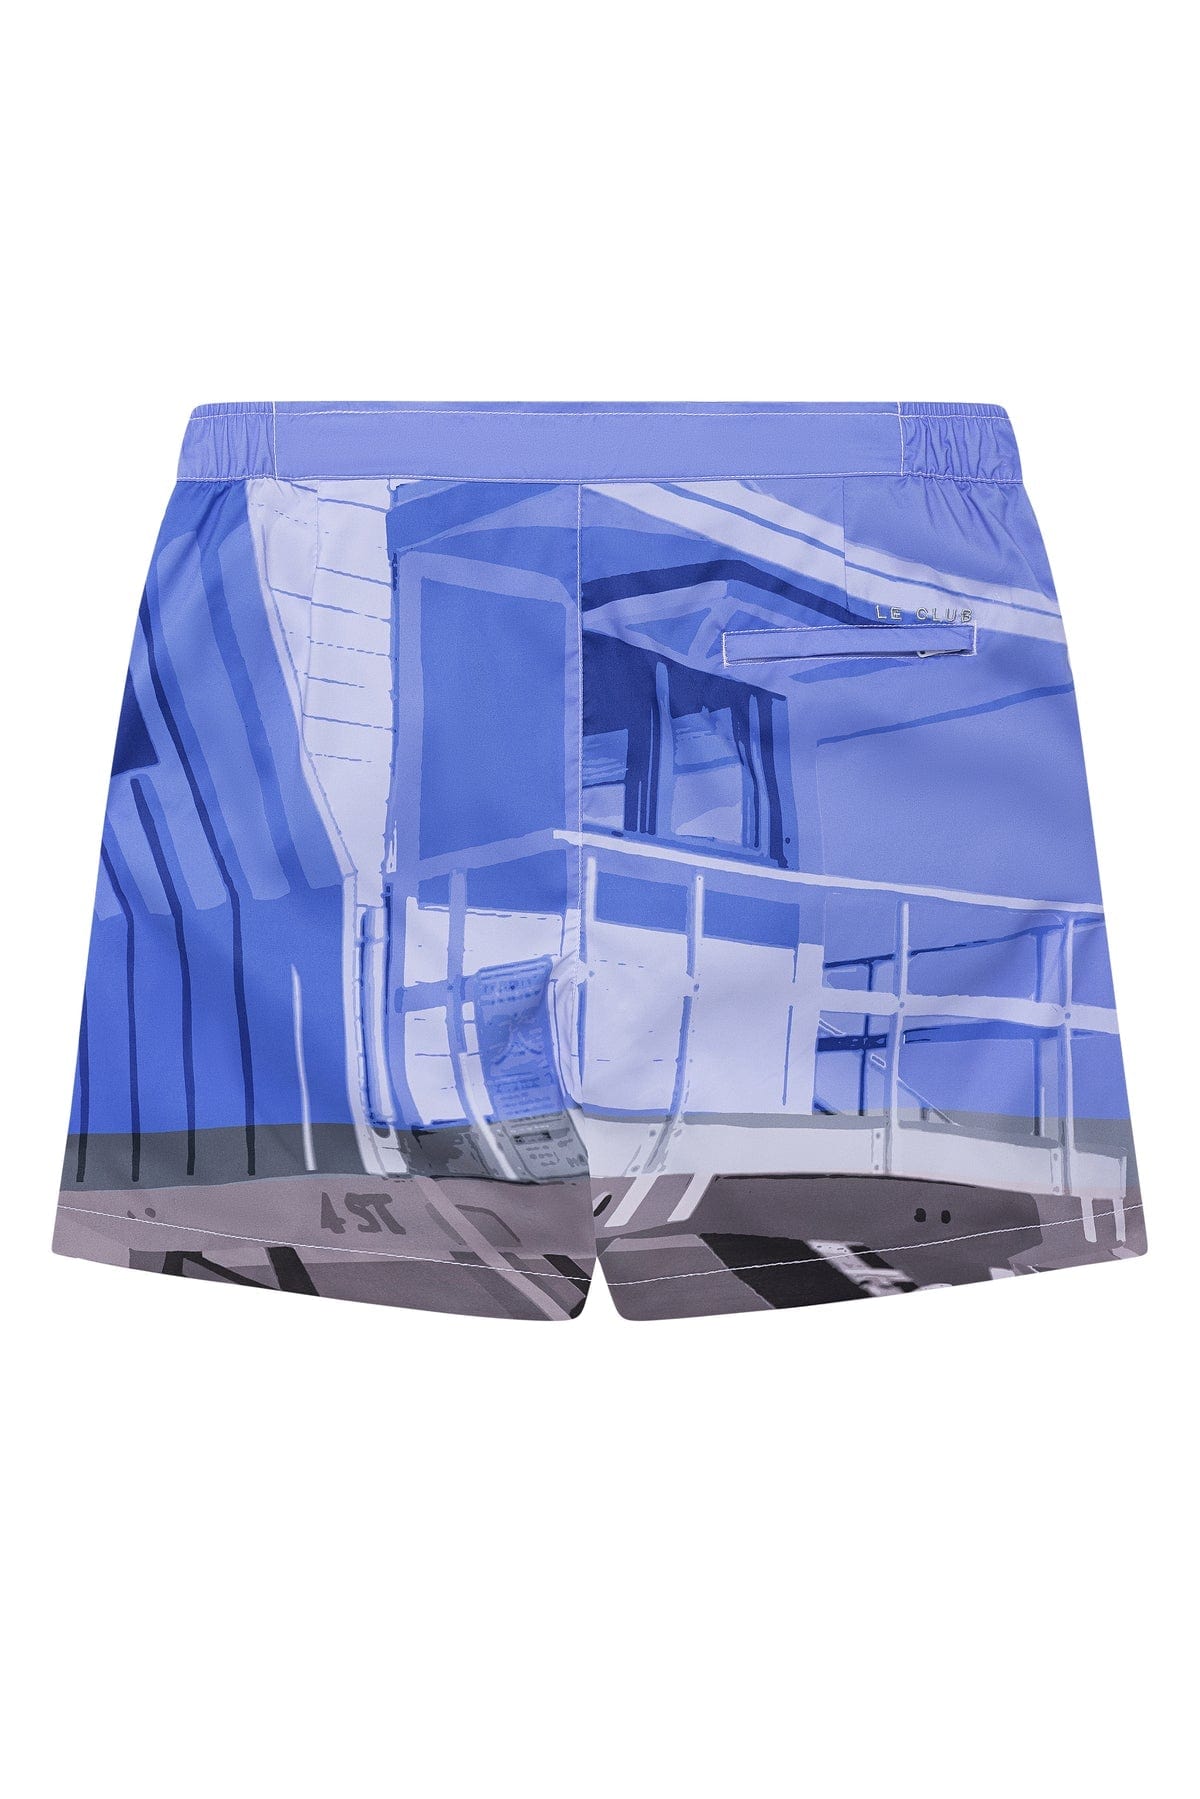 Load image into Gallery viewer, Le Club Apparel &amp;amp; Accessories &amp;gt; Clothing &amp;gt; Shorts Club Men&amp;#39;s Swim Trunk Miami Beach Tower 4 2022 Le Club Men&amp;#39;s Swim Trunk Miami Beach Tower 4
